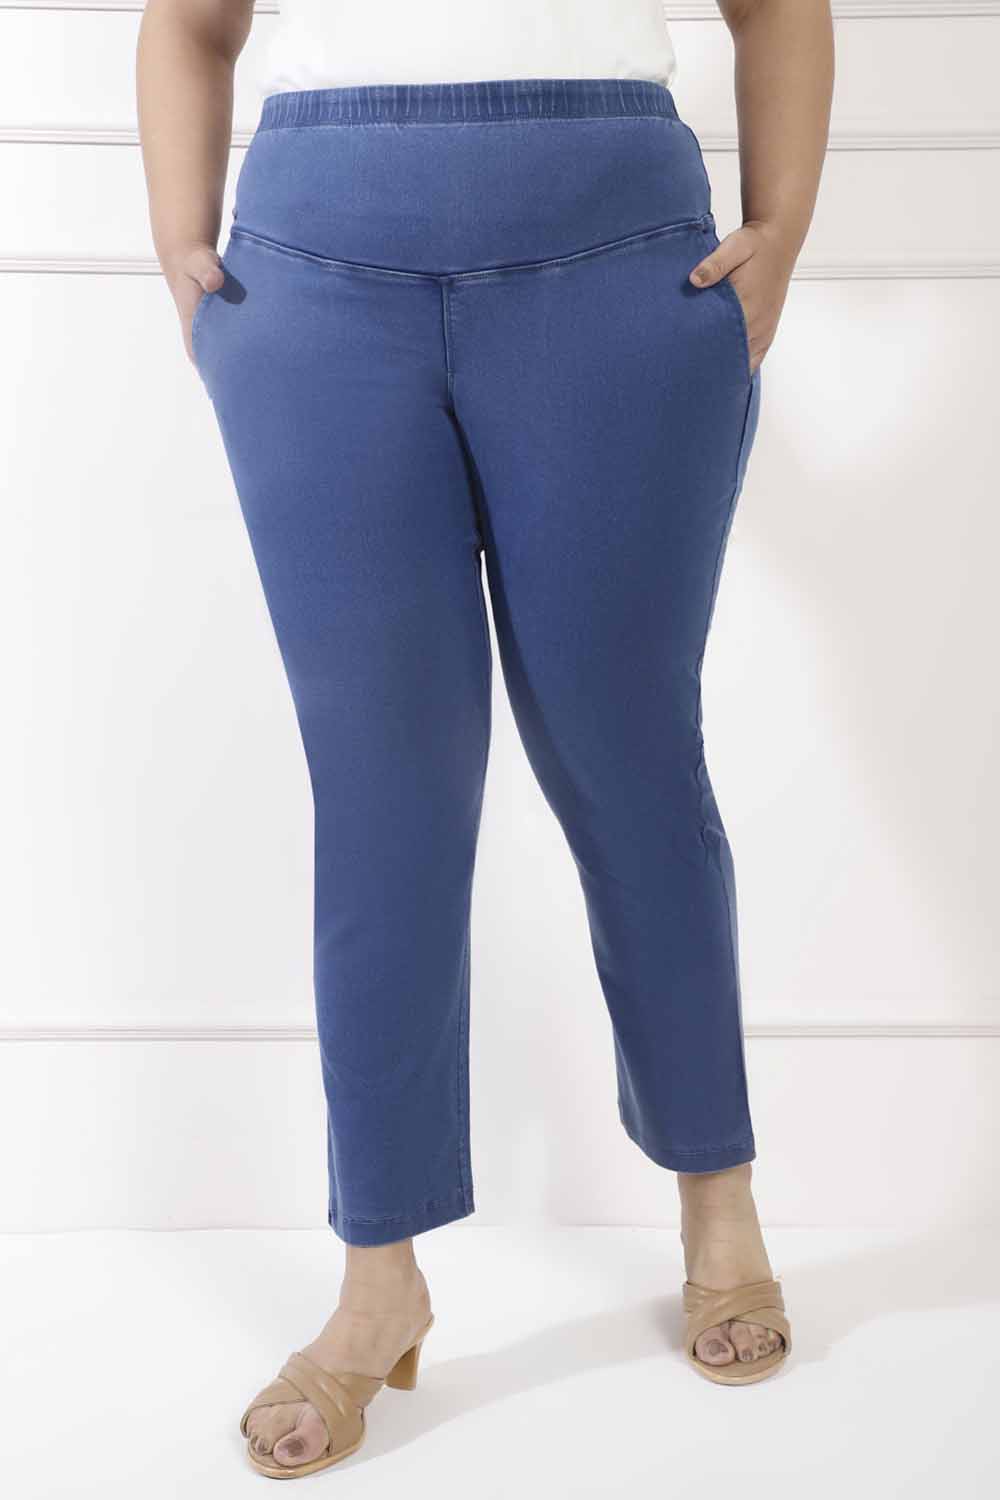 Cotton Plain Comfort Ladies Ankle Length Legging, Size: Free Size at Rs 250  in Pune